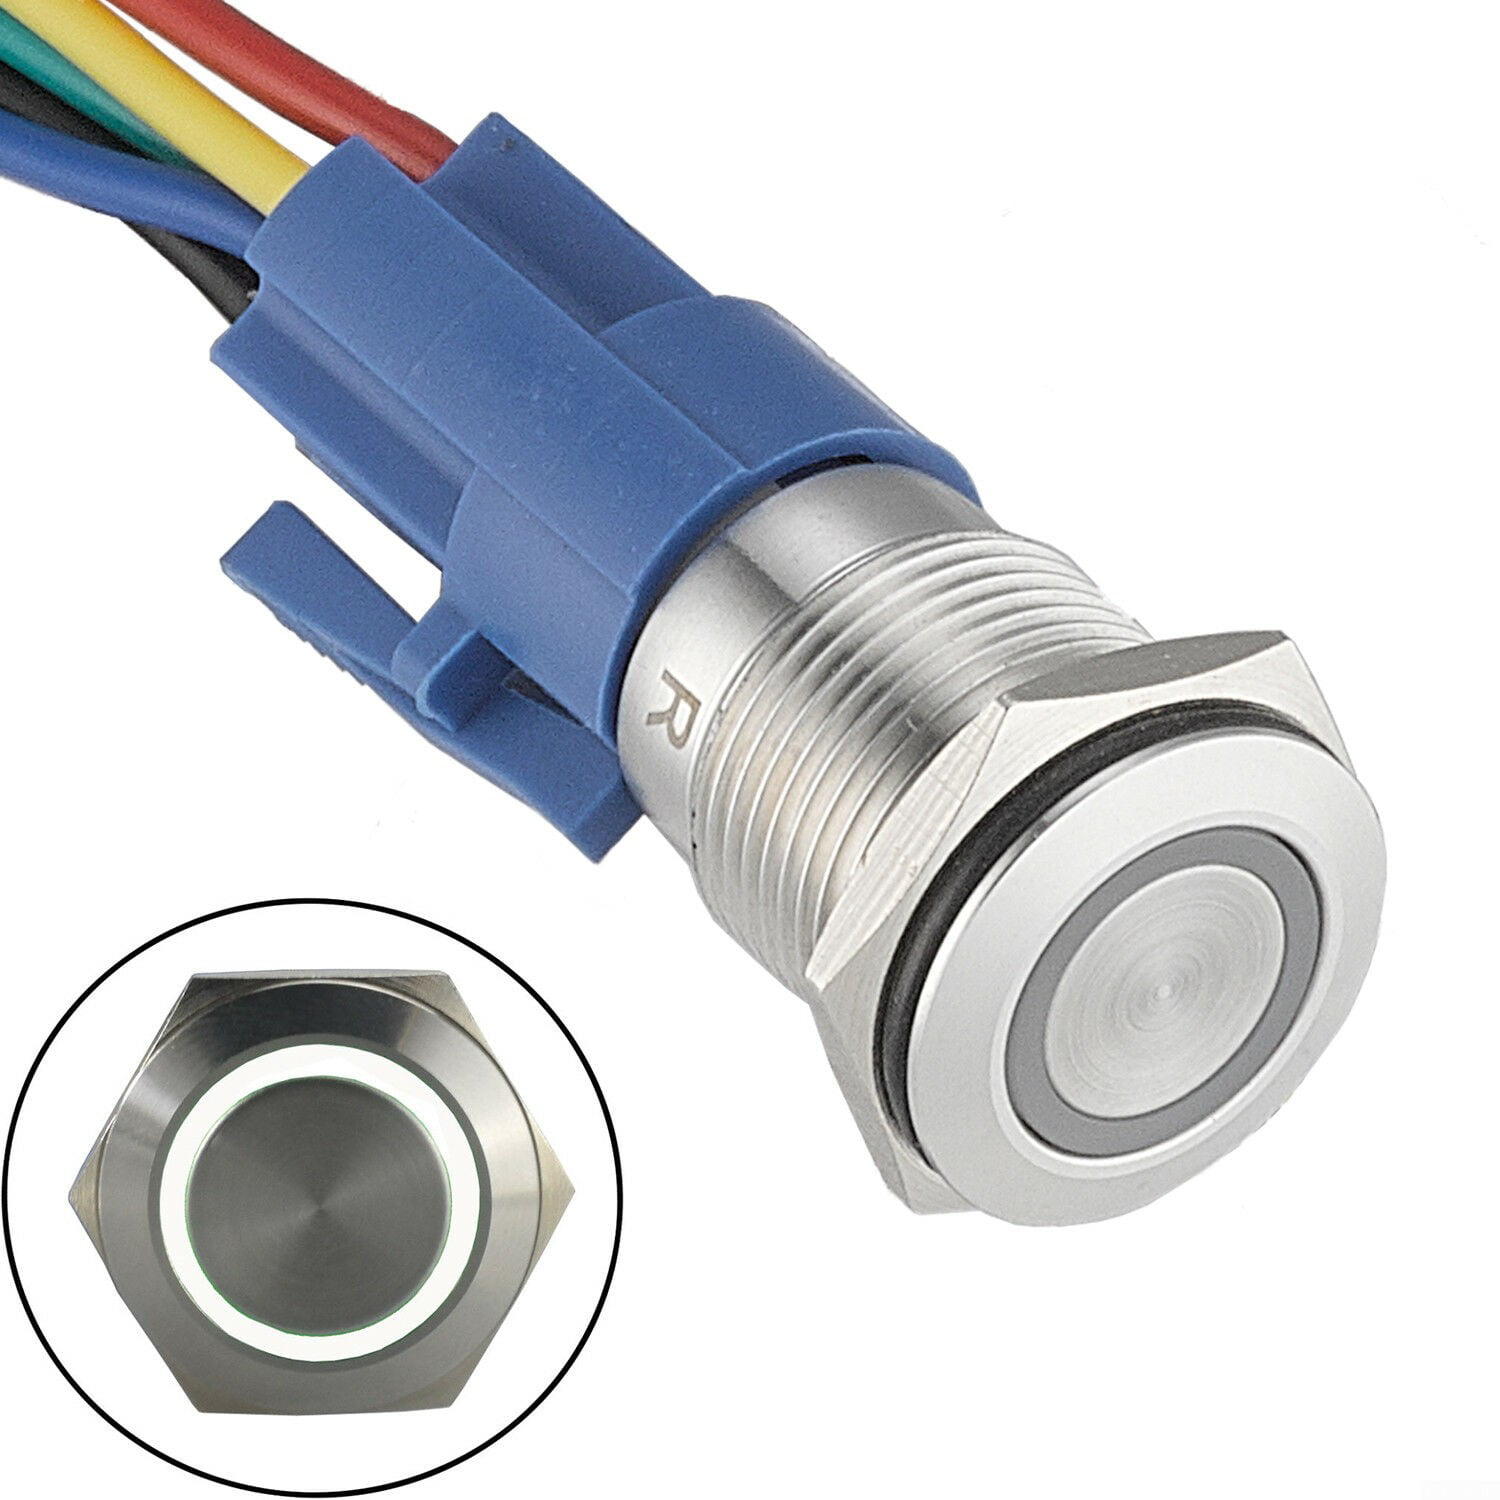 16mm Latching Push Button Blue Latching Switch 12V DC On Off LED Self-locking